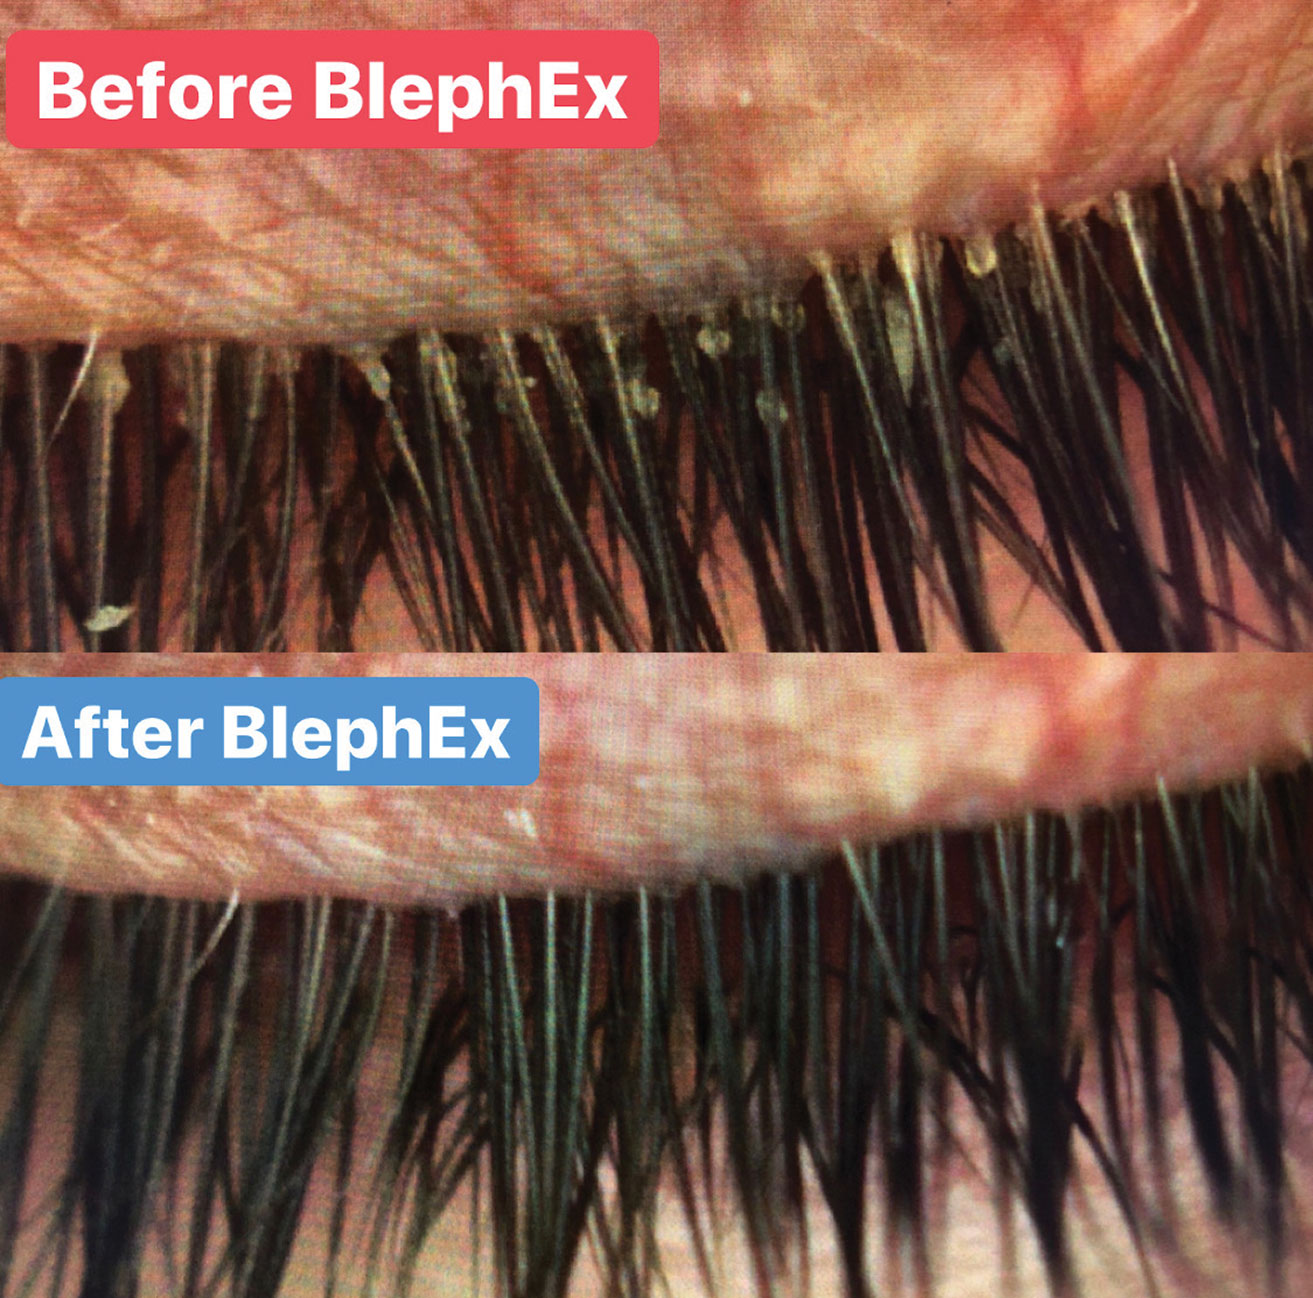 Advances in the management of MGD include a number of office-based therapeutics, such as BlephEx. Lid debridement helps remove biofilm and debris and uncap the openings of the oil glands.